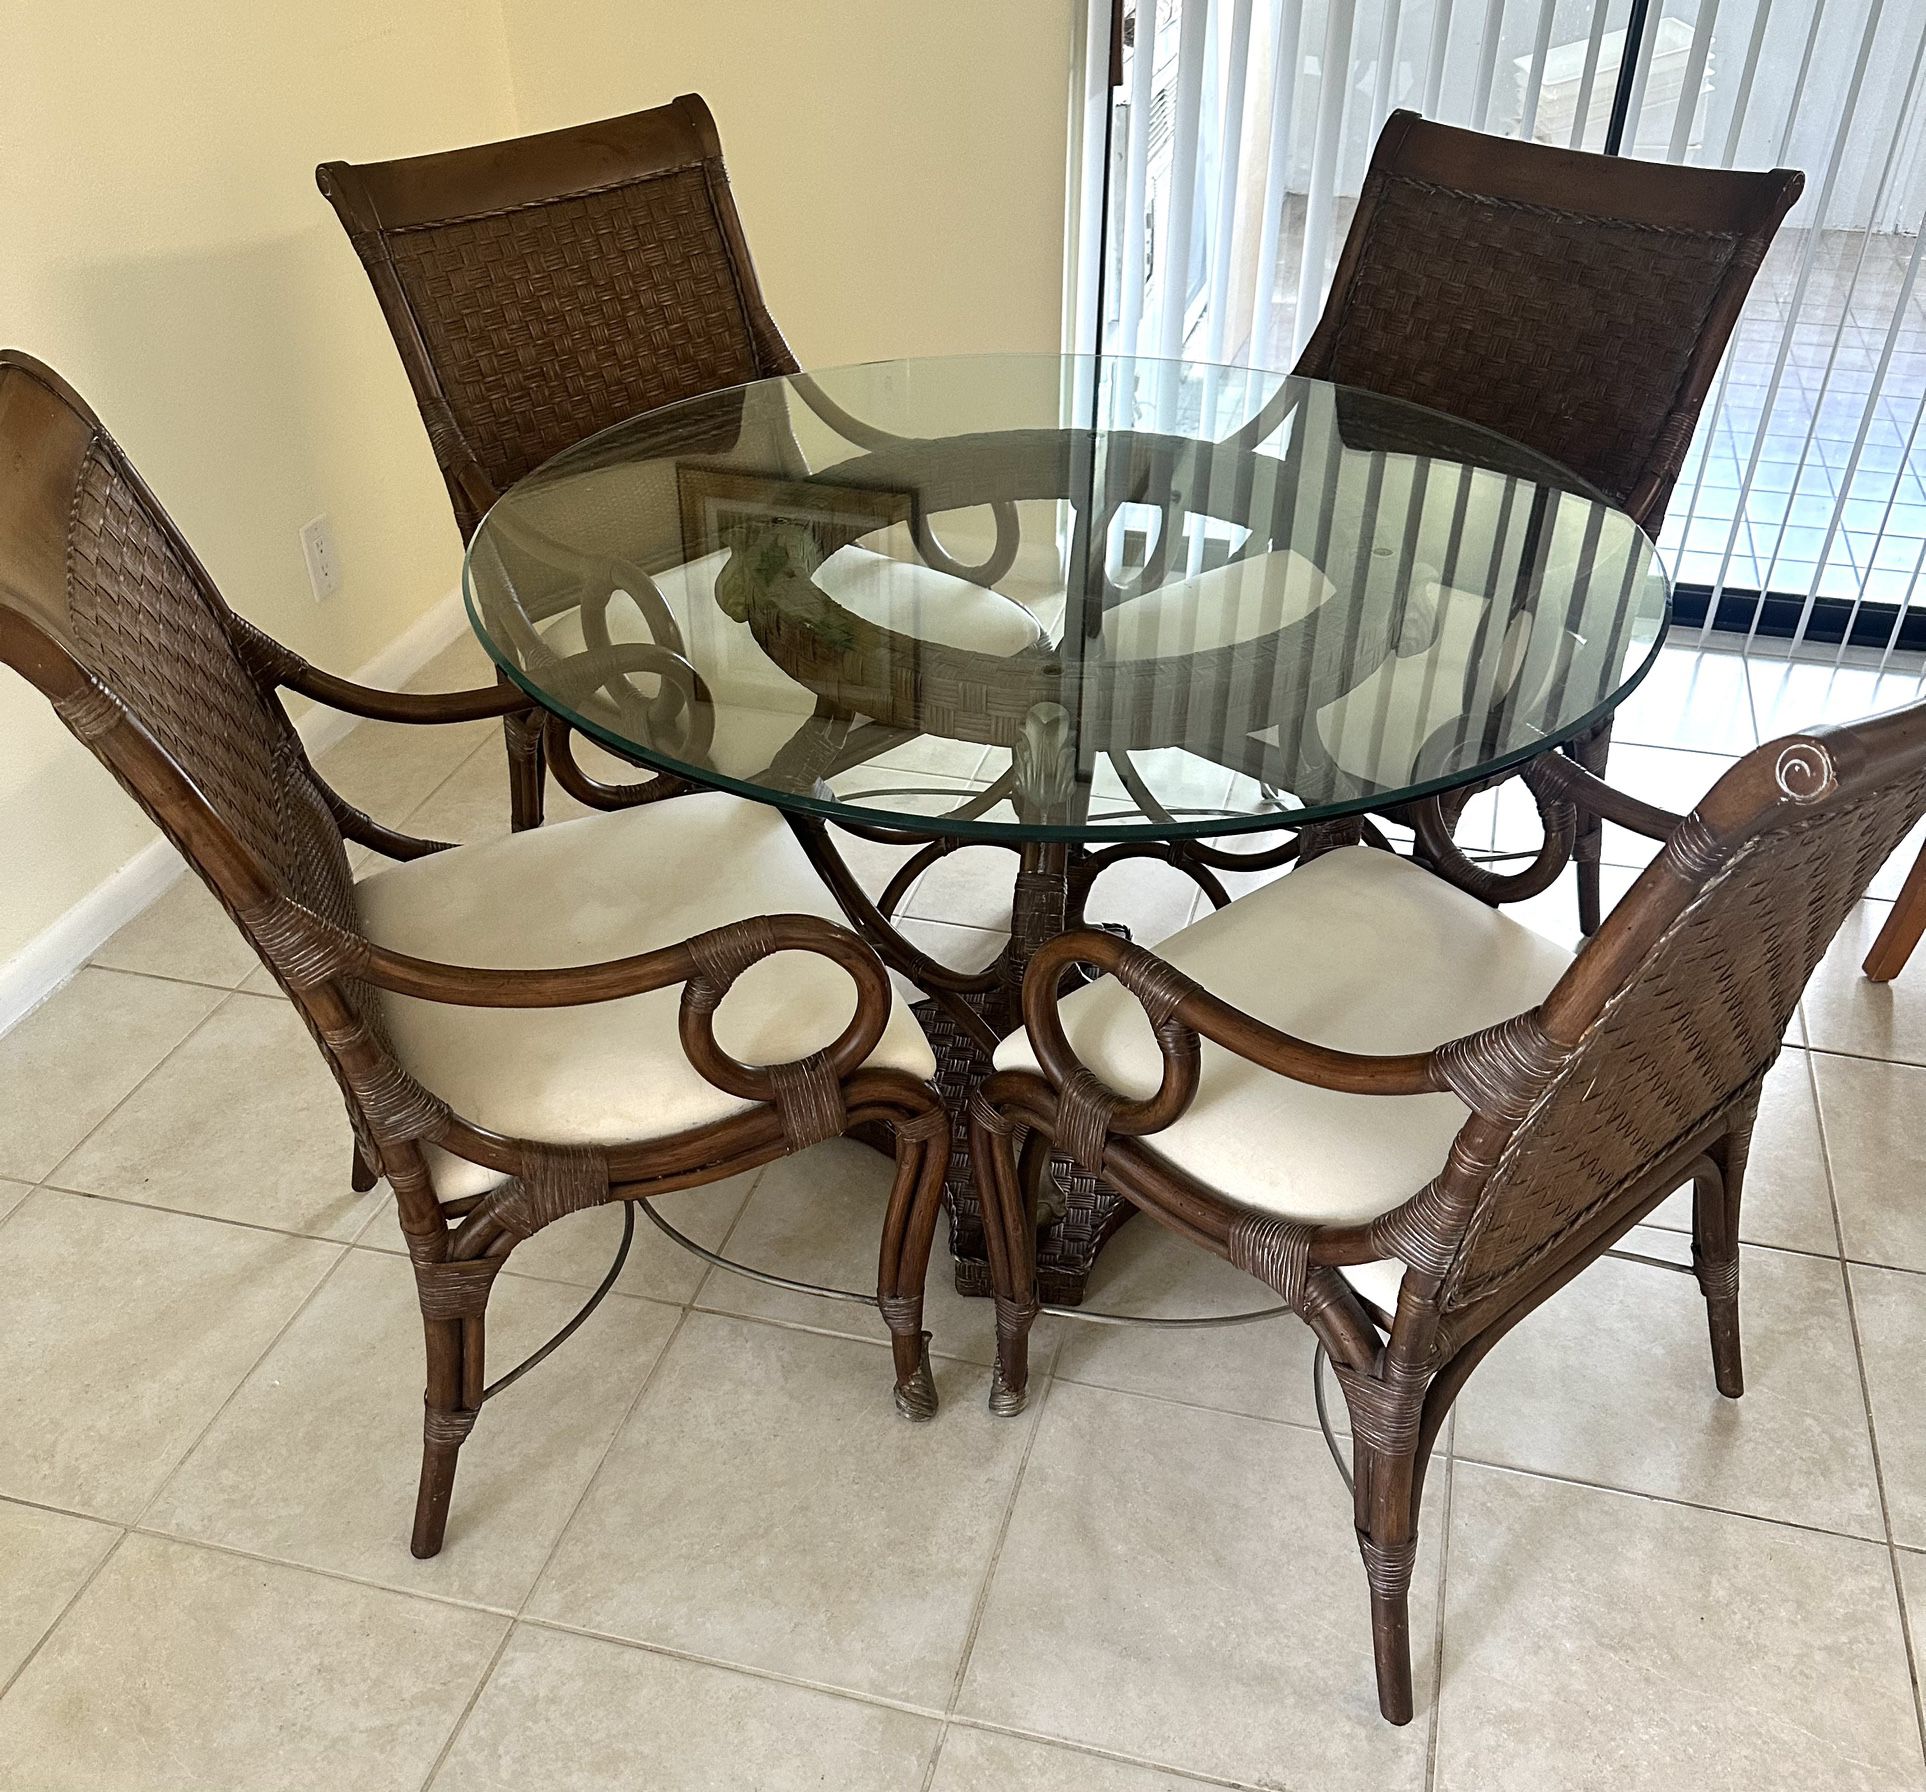 Glass Kitchen Table And Chairs Set